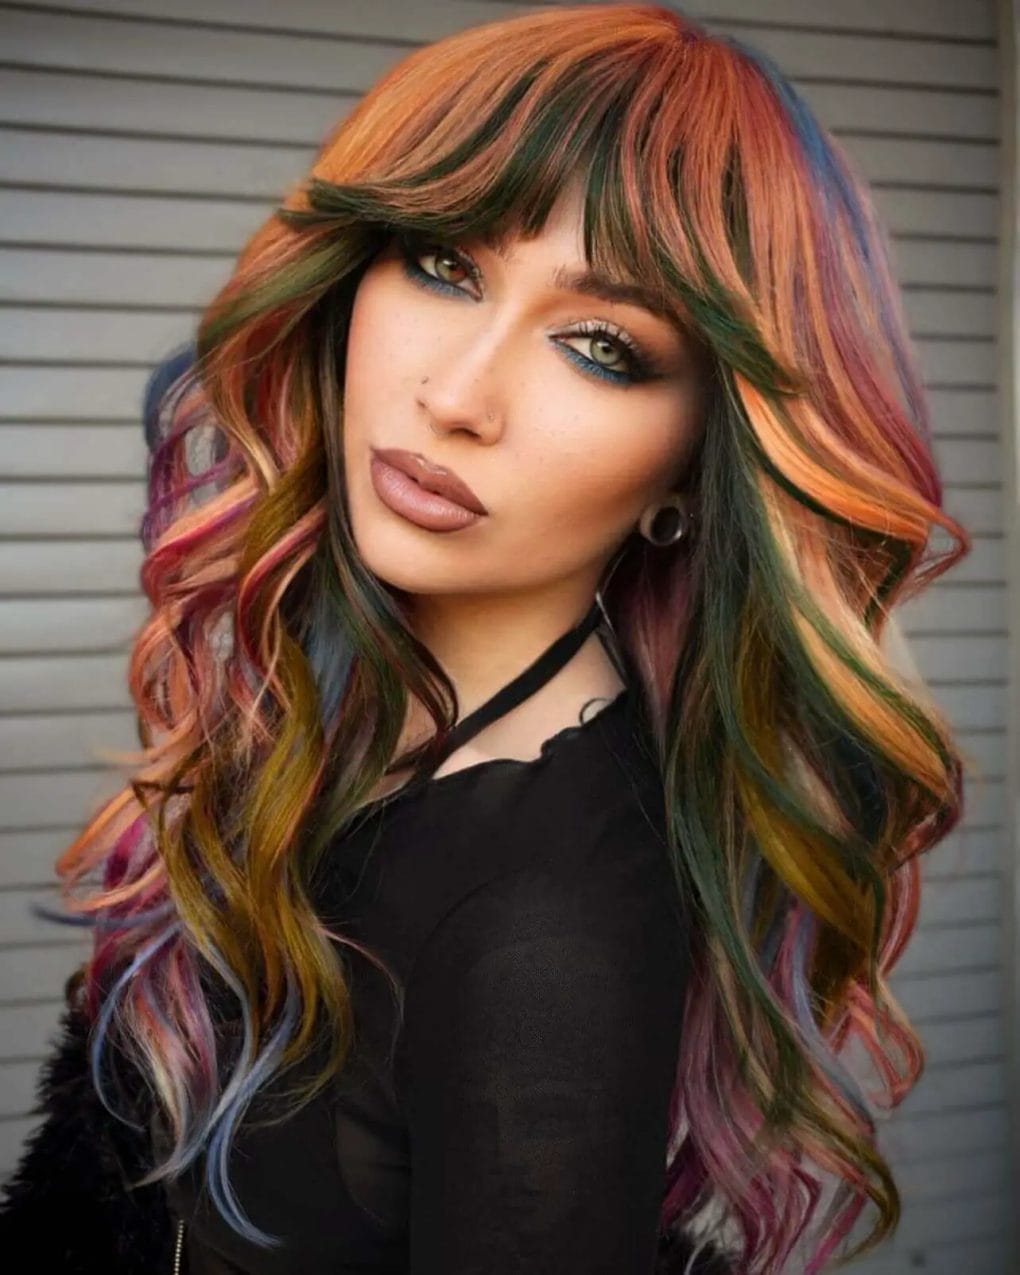 Multicolored waves with a vivid curtain bangs blend